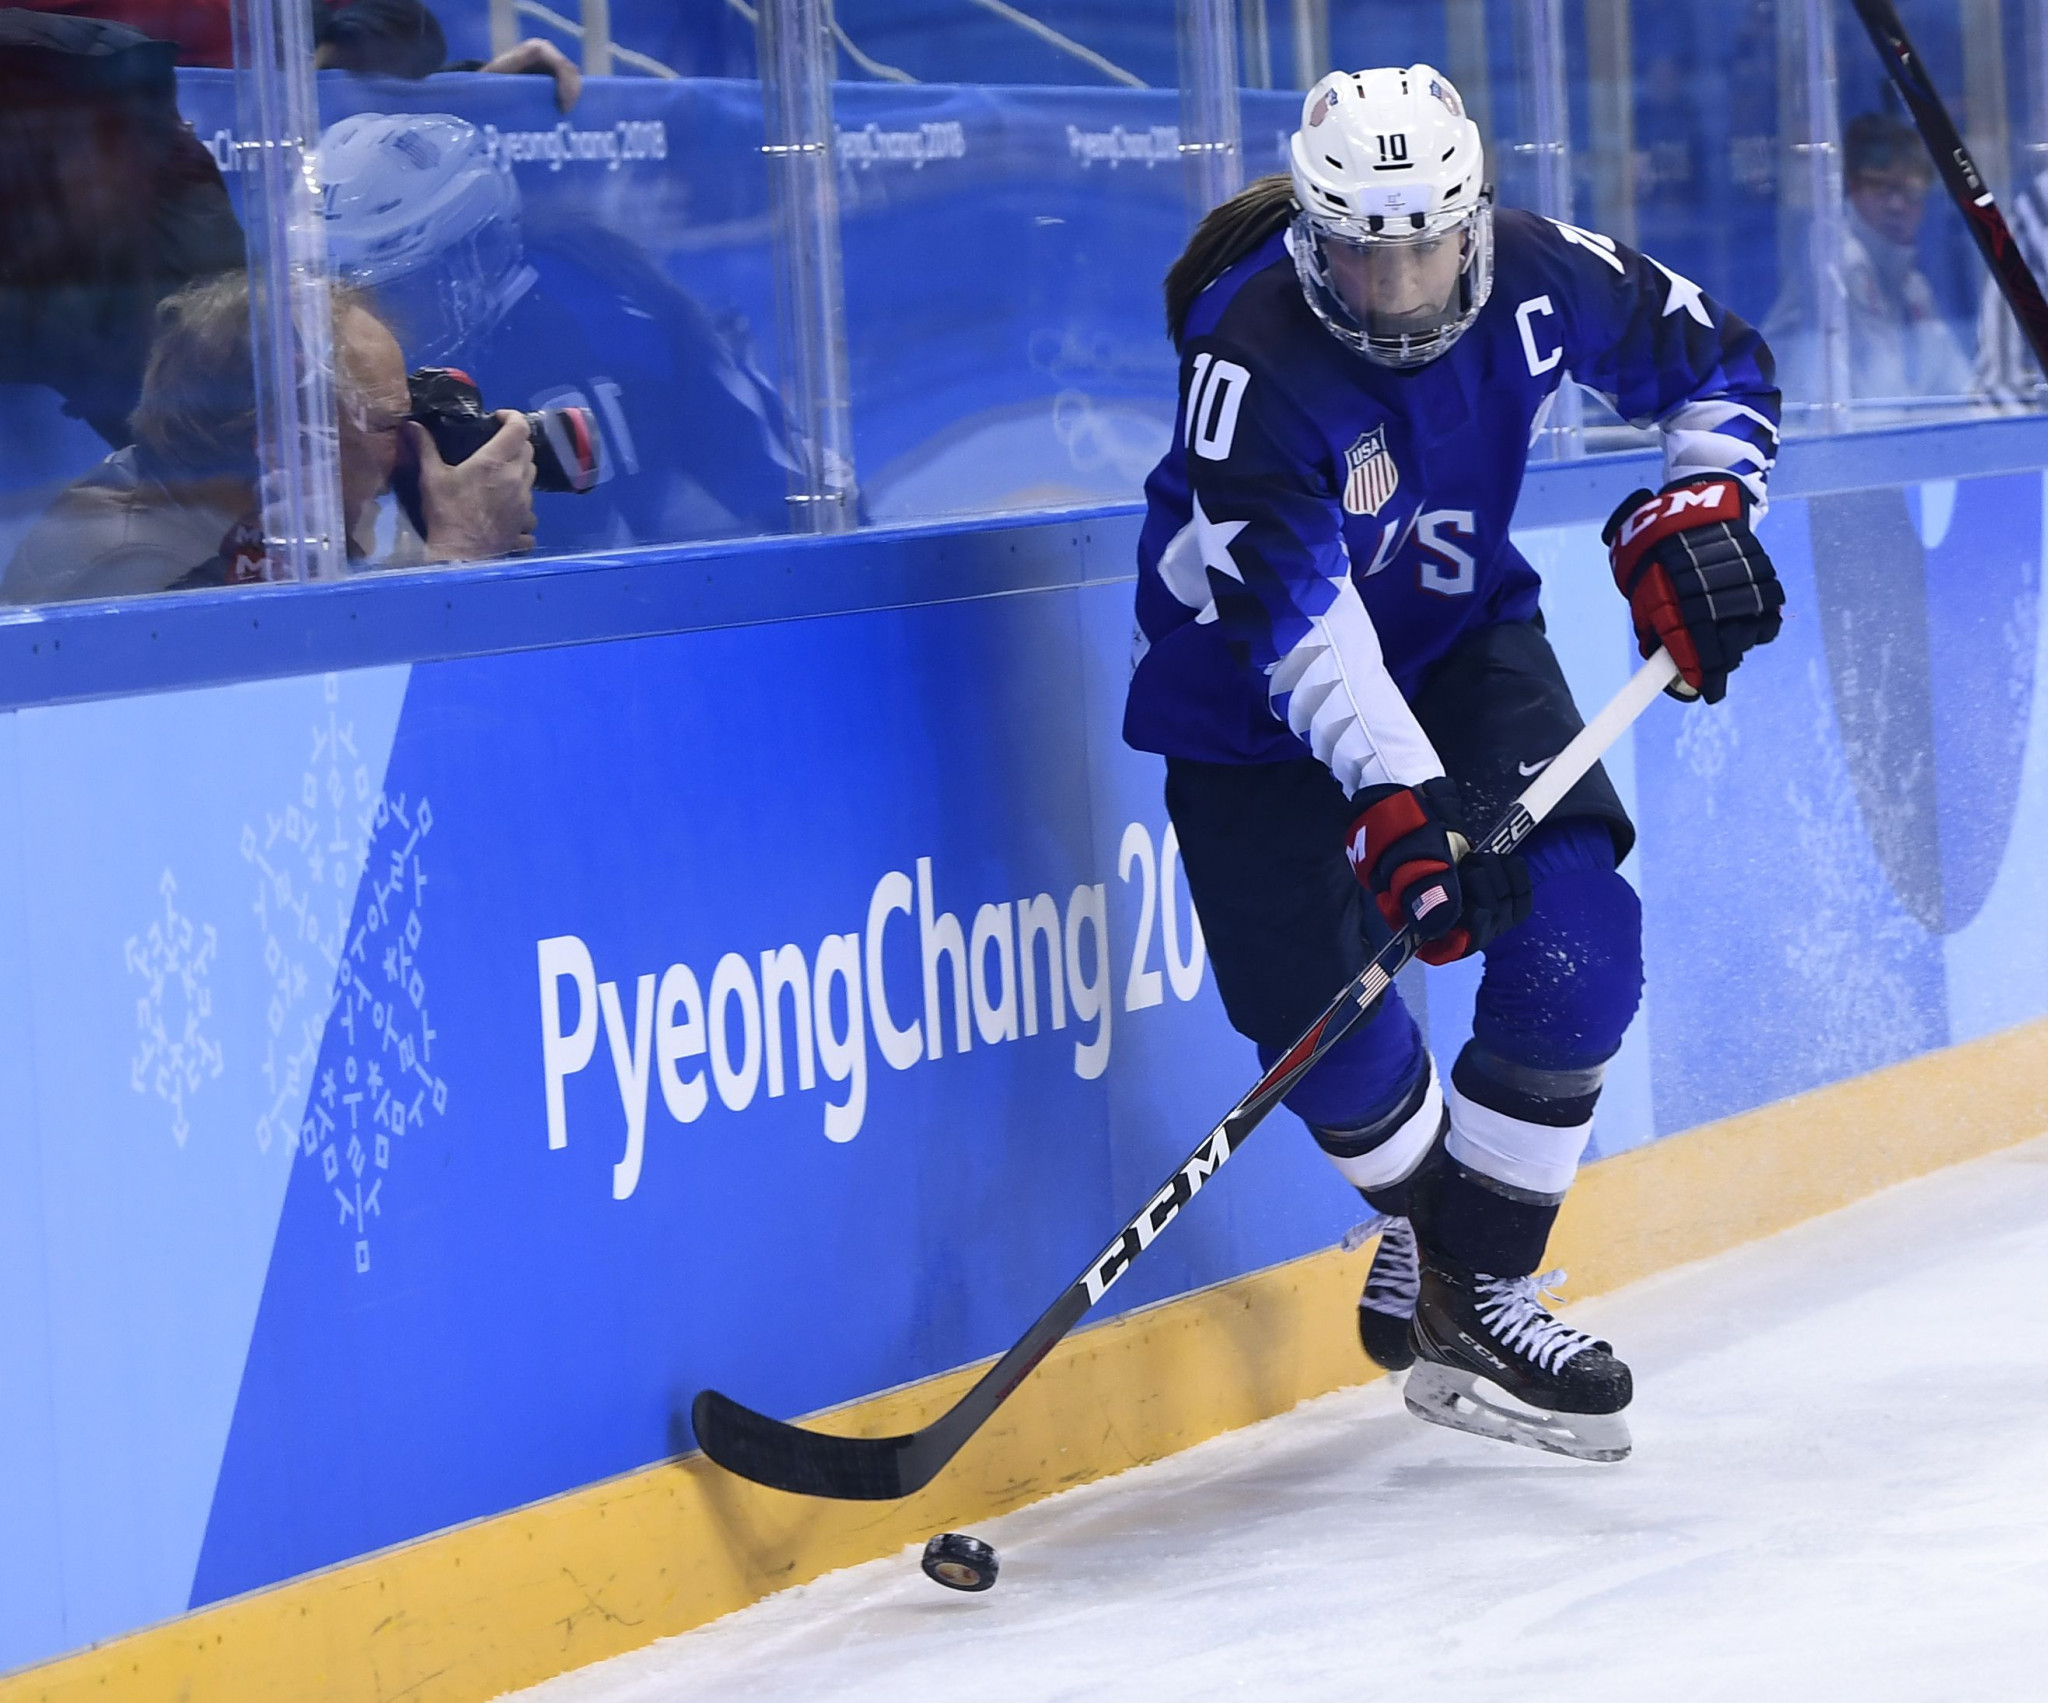 Meghan Duggan earned gold in the ice hockey contest at the Pyeongchang 2018 Winter Olympic Games ©Getty Images